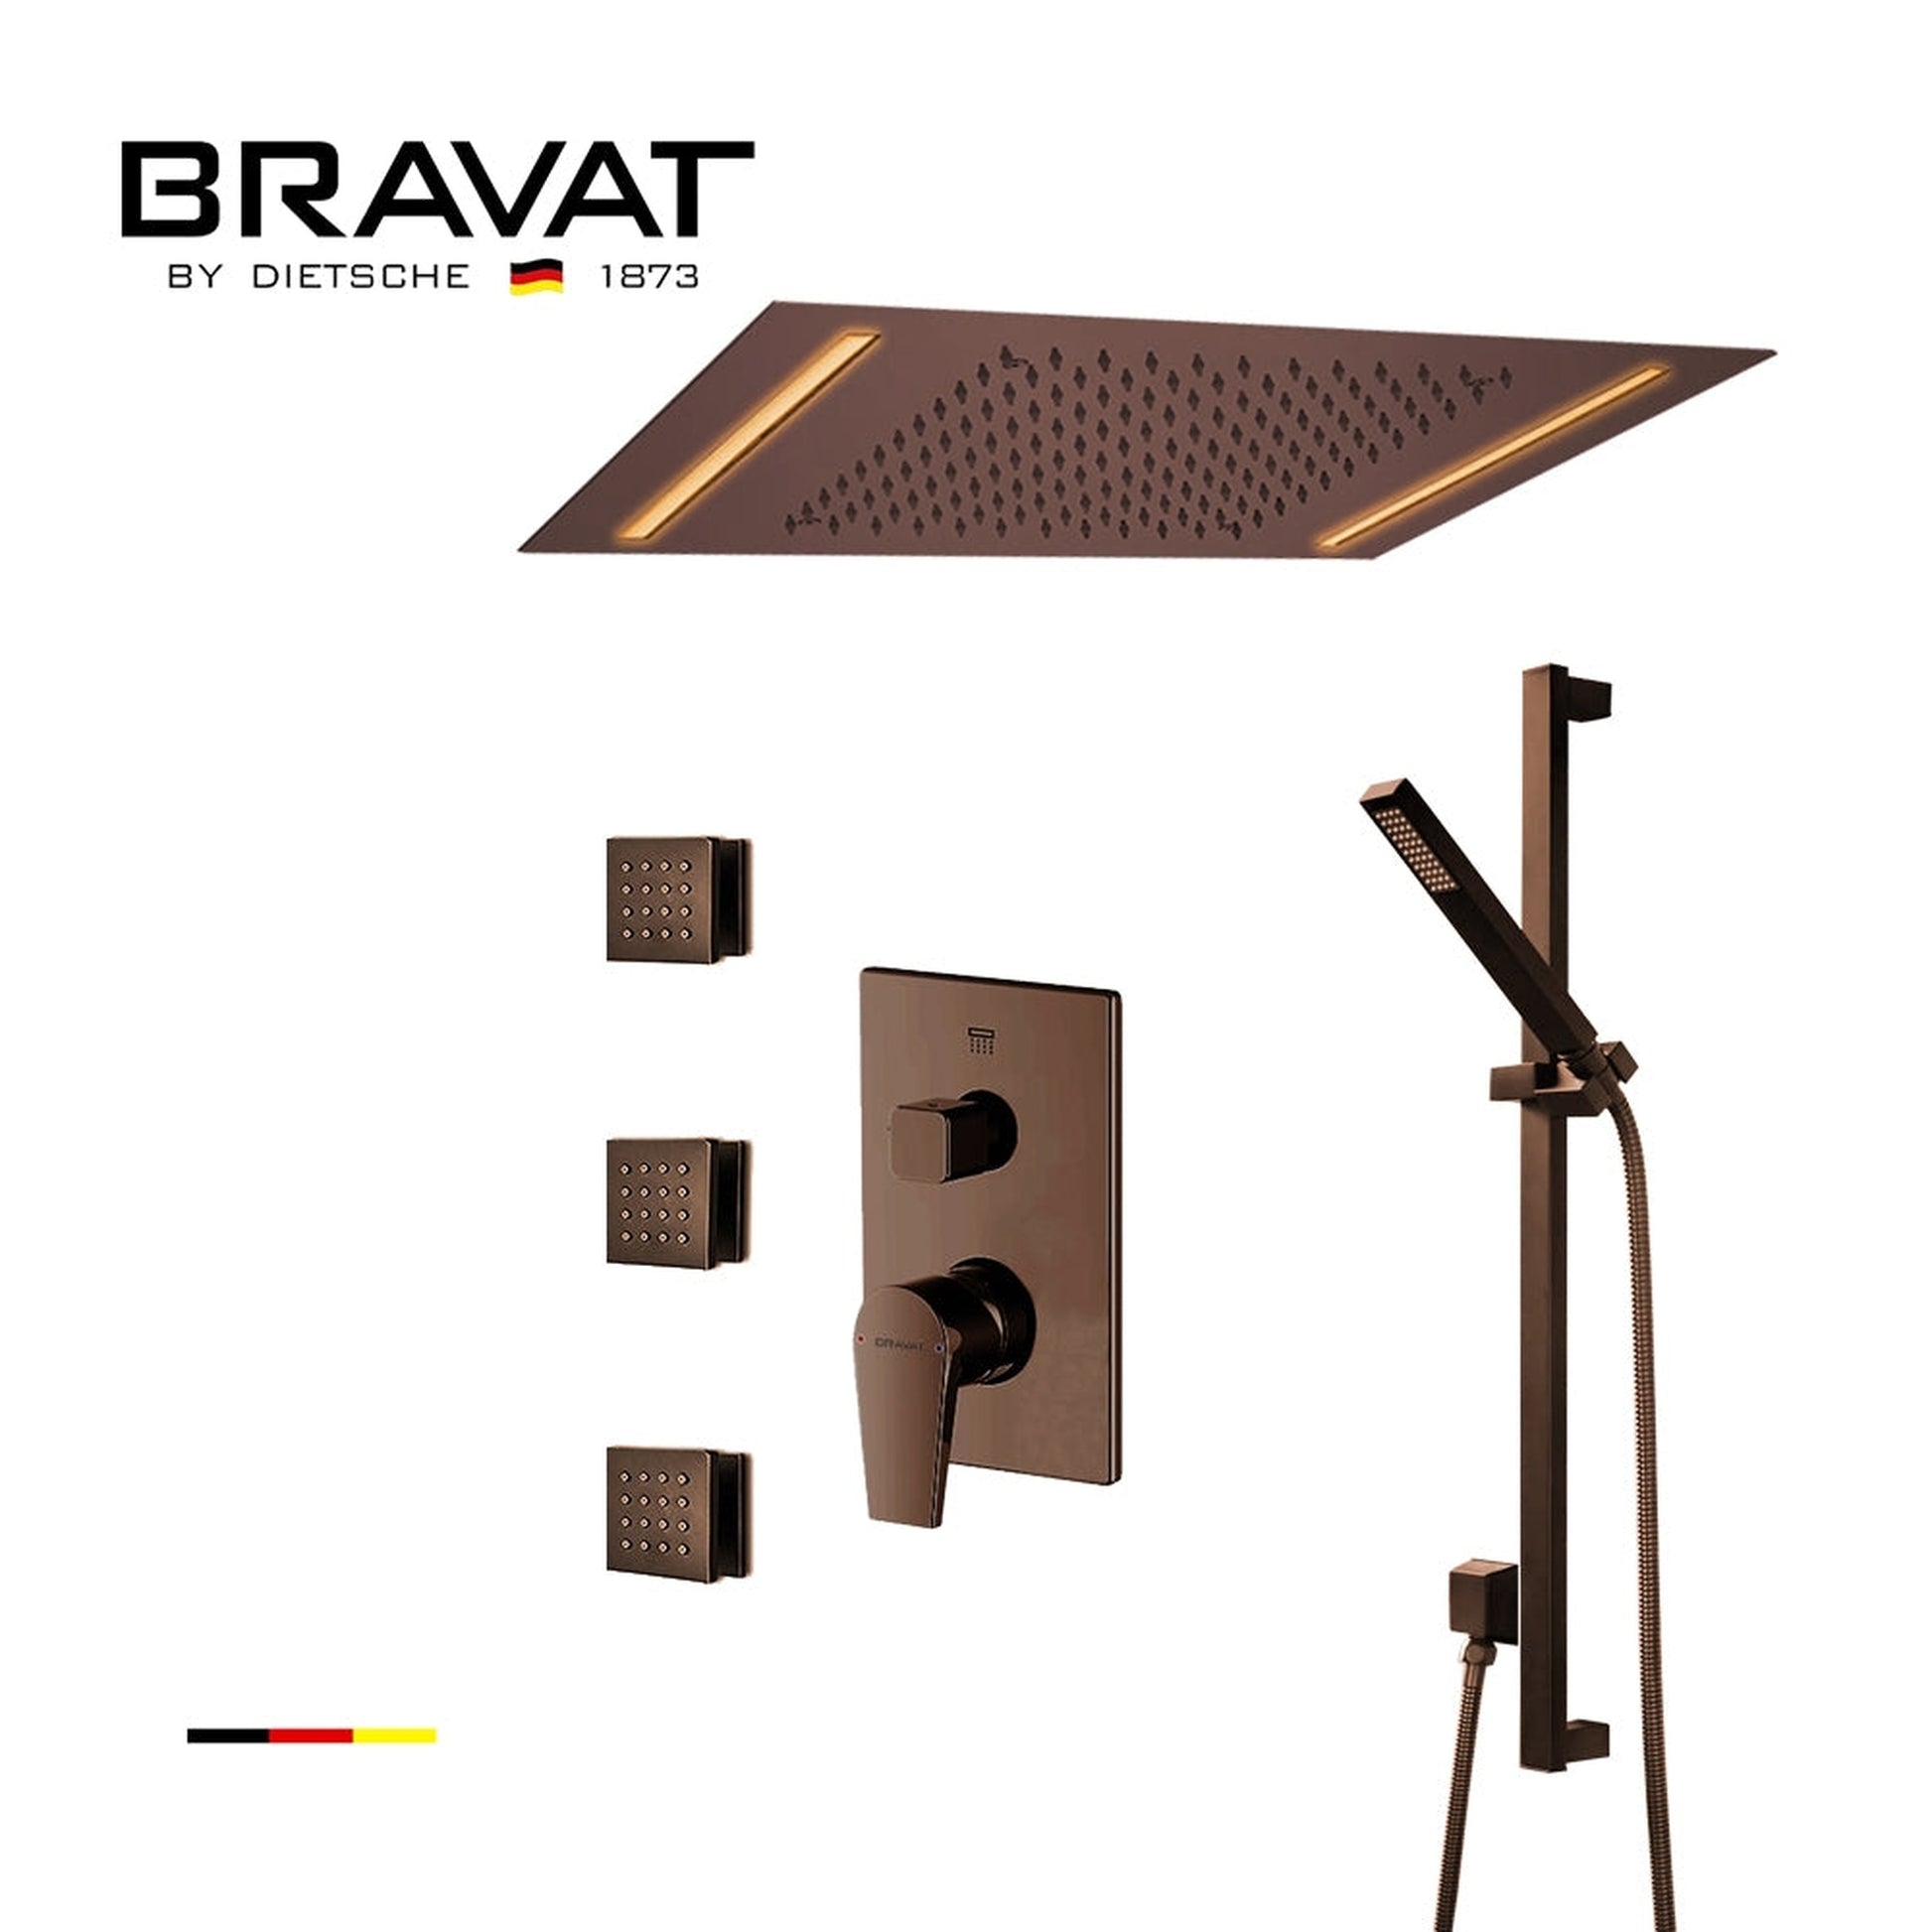 Fontana Bravat Light Oil Rubbed Bronze Ceiling Mounted Remote Controlled LED Rainfall Shower System With Hand Shower and 3-Jet Body Sprays